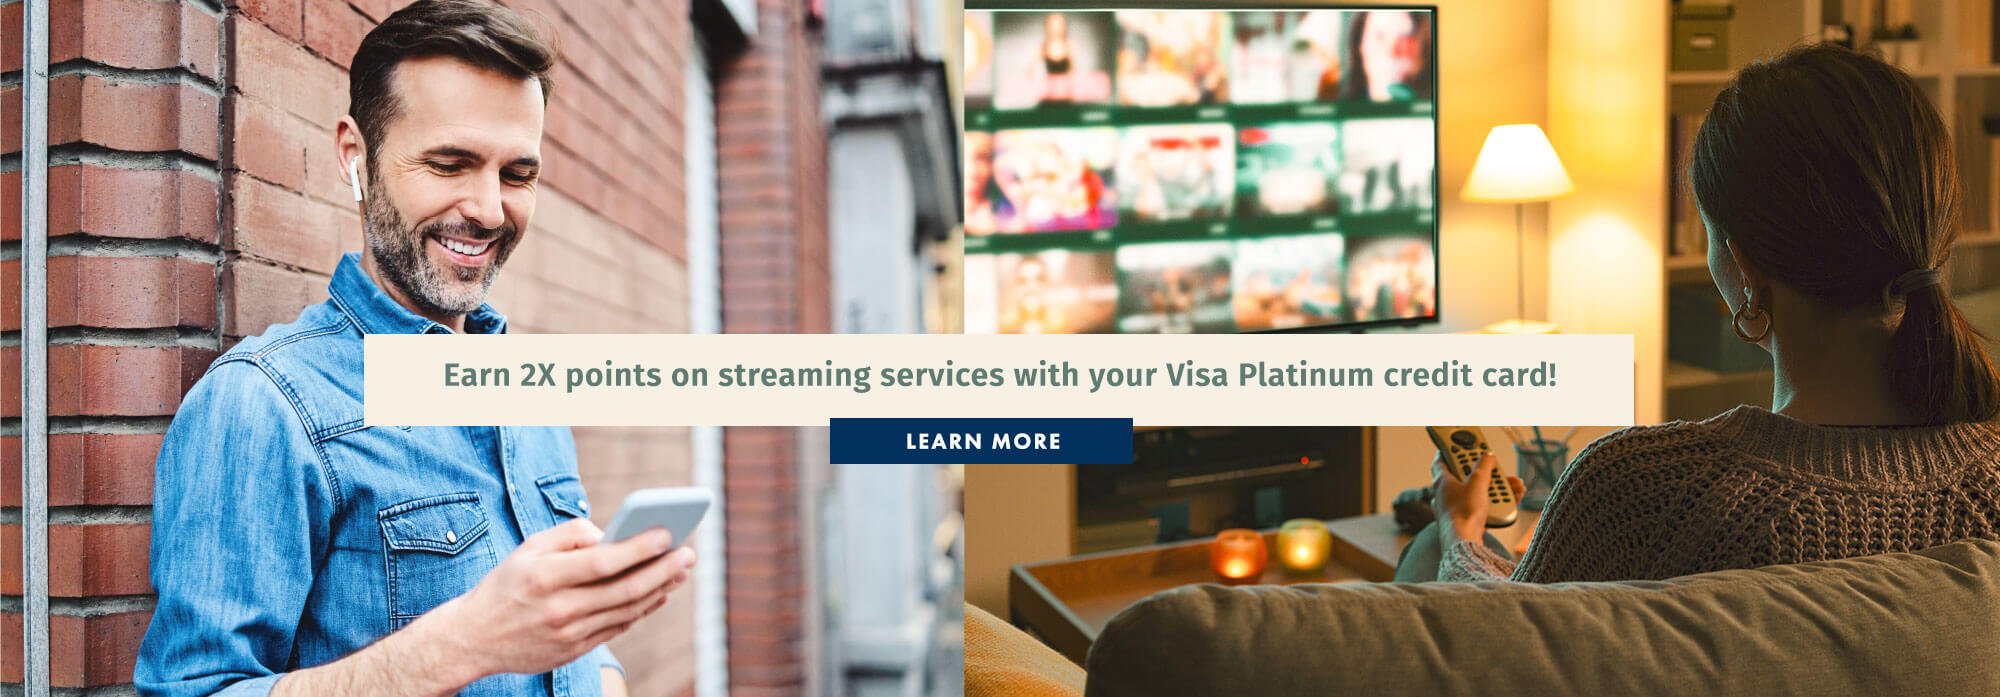 Earn 2X points on streaming services with your Visa Platinum credit card!